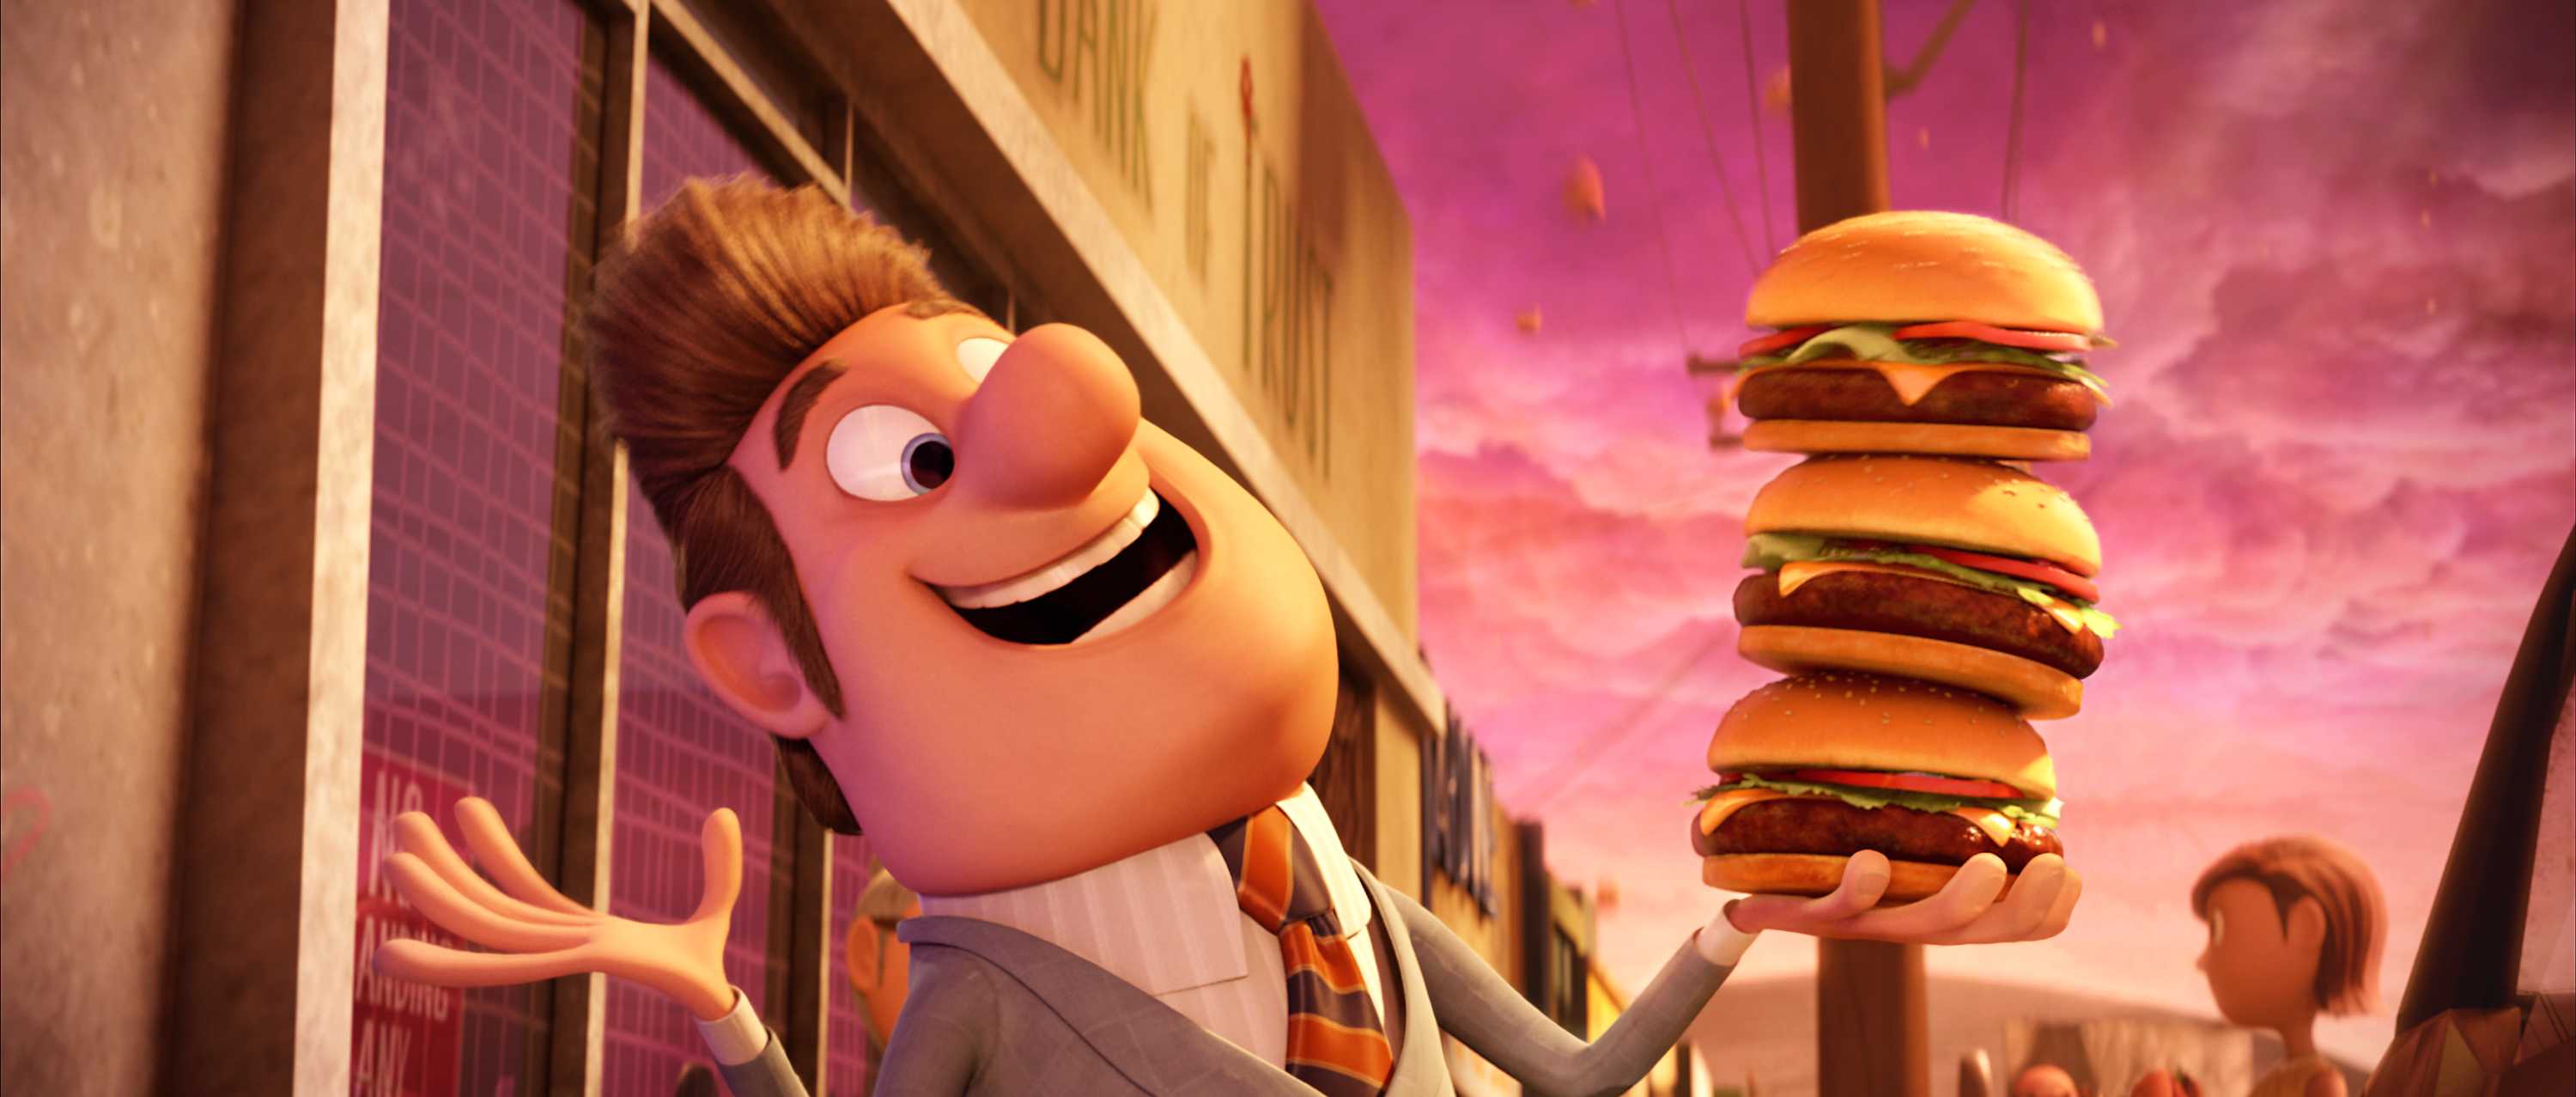 Cloudy With A Chance Of Meatballs #5